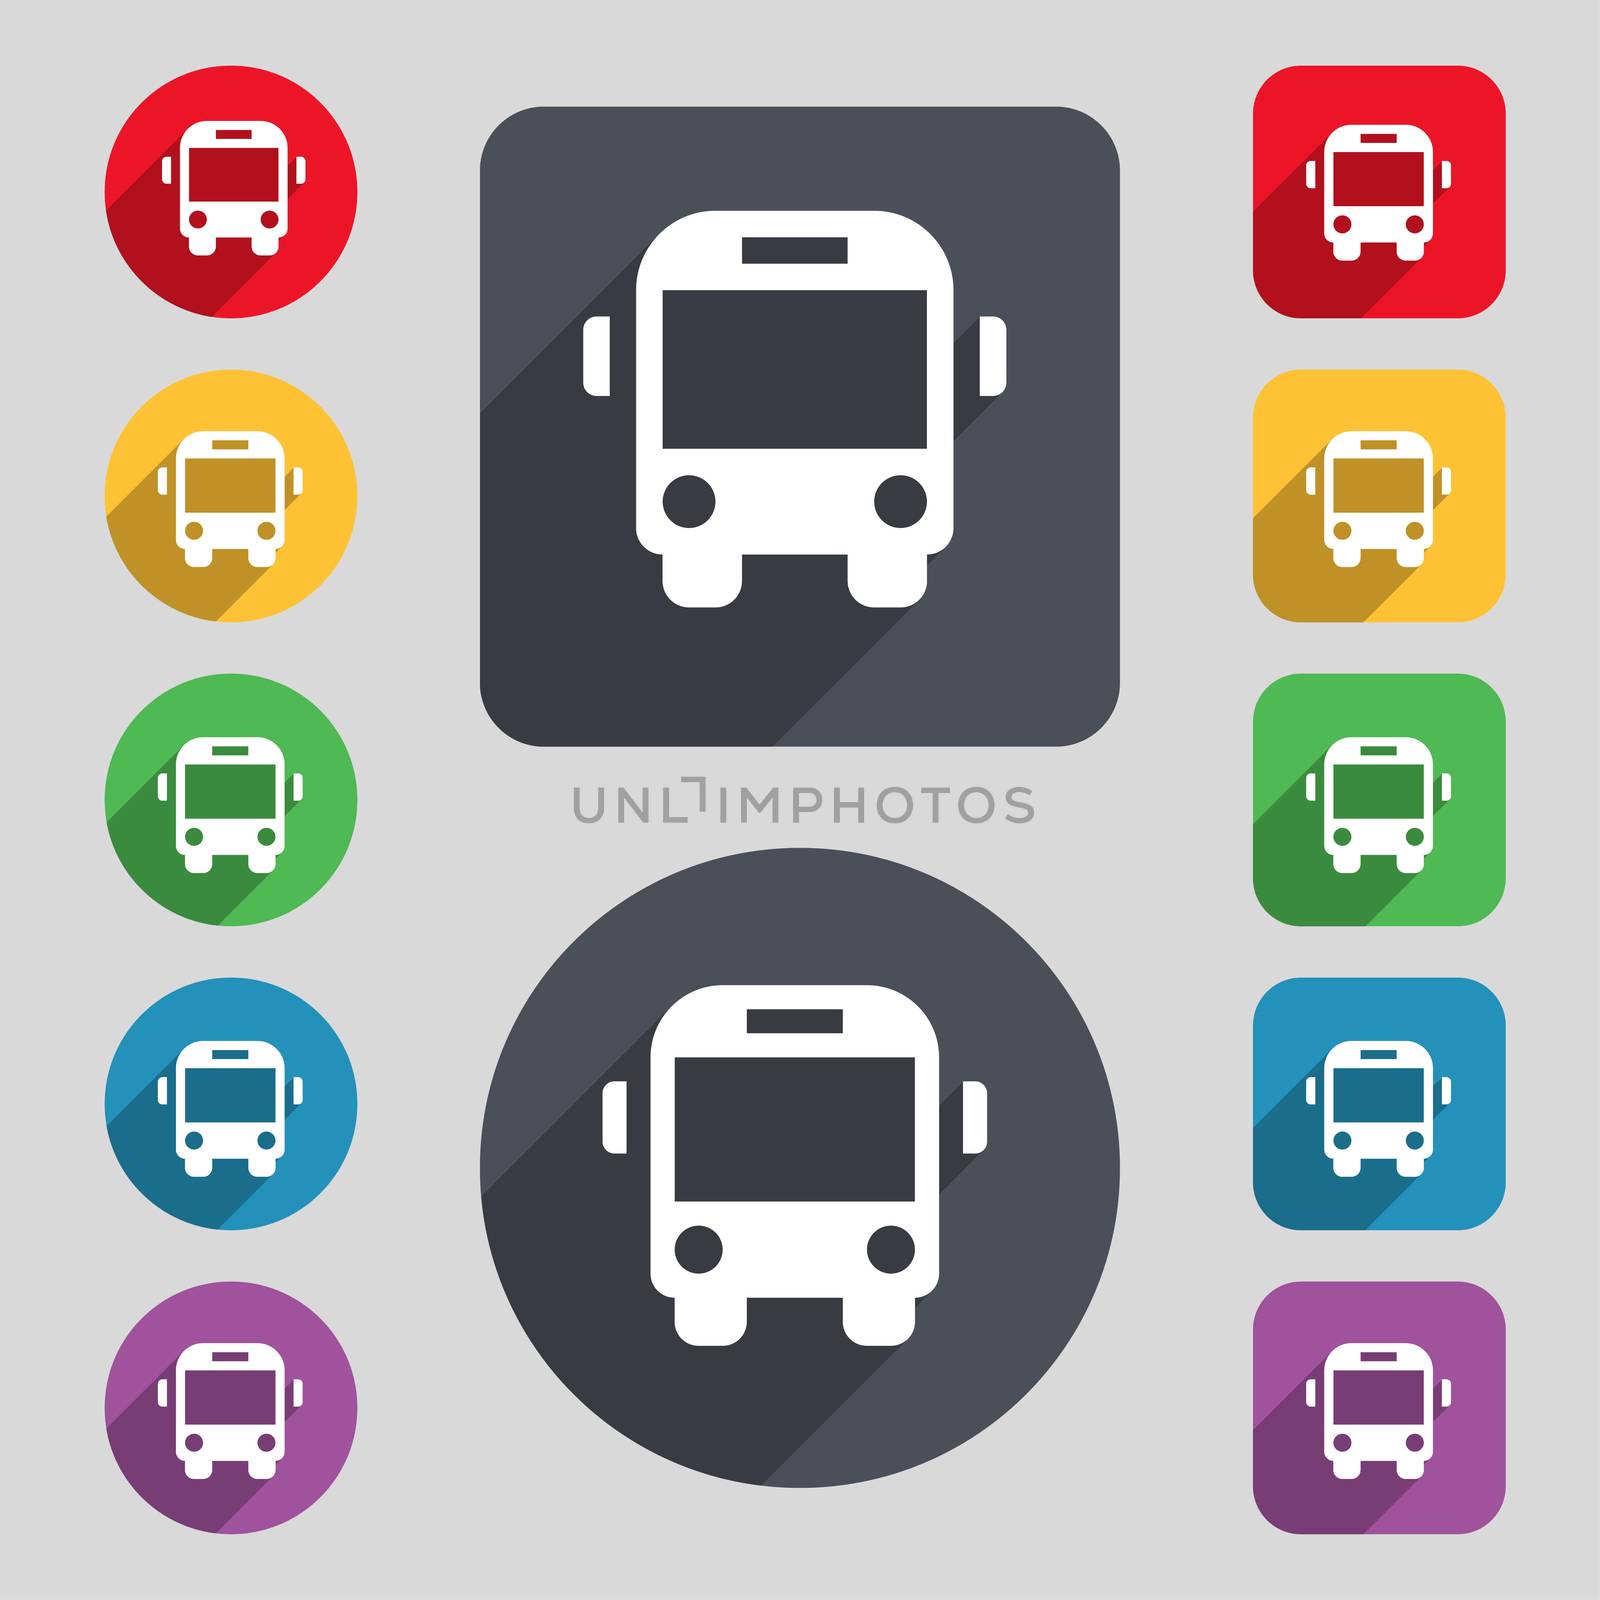 Bus icon sign. A set of 12 colored buttons and a long shadow. Flat design. illustration